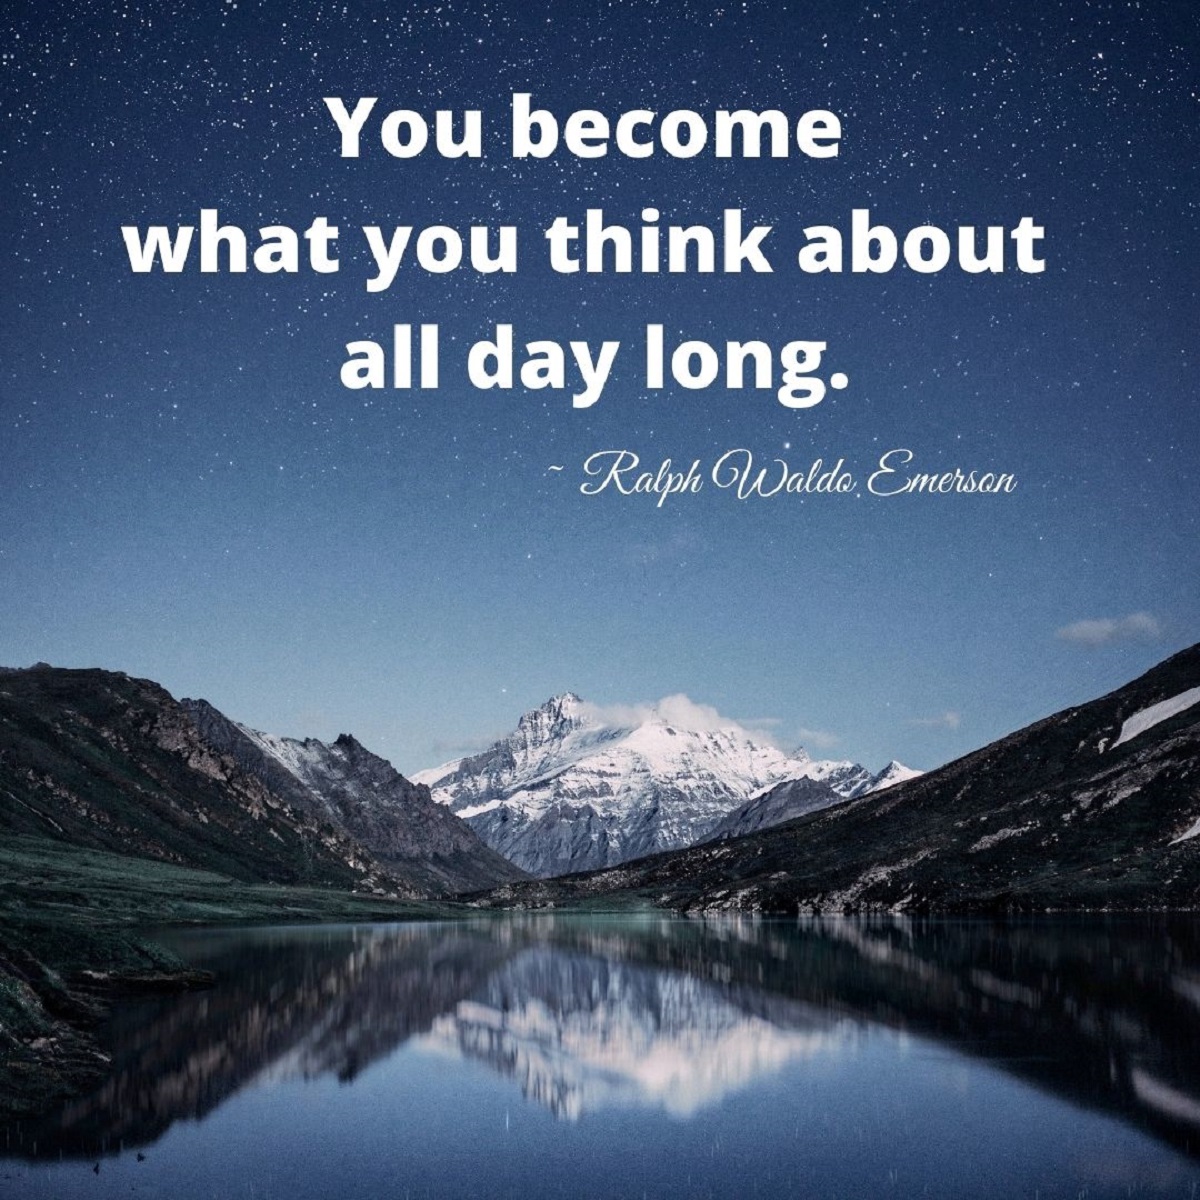 You become what you think quote by Emerson on image of mountain with stars